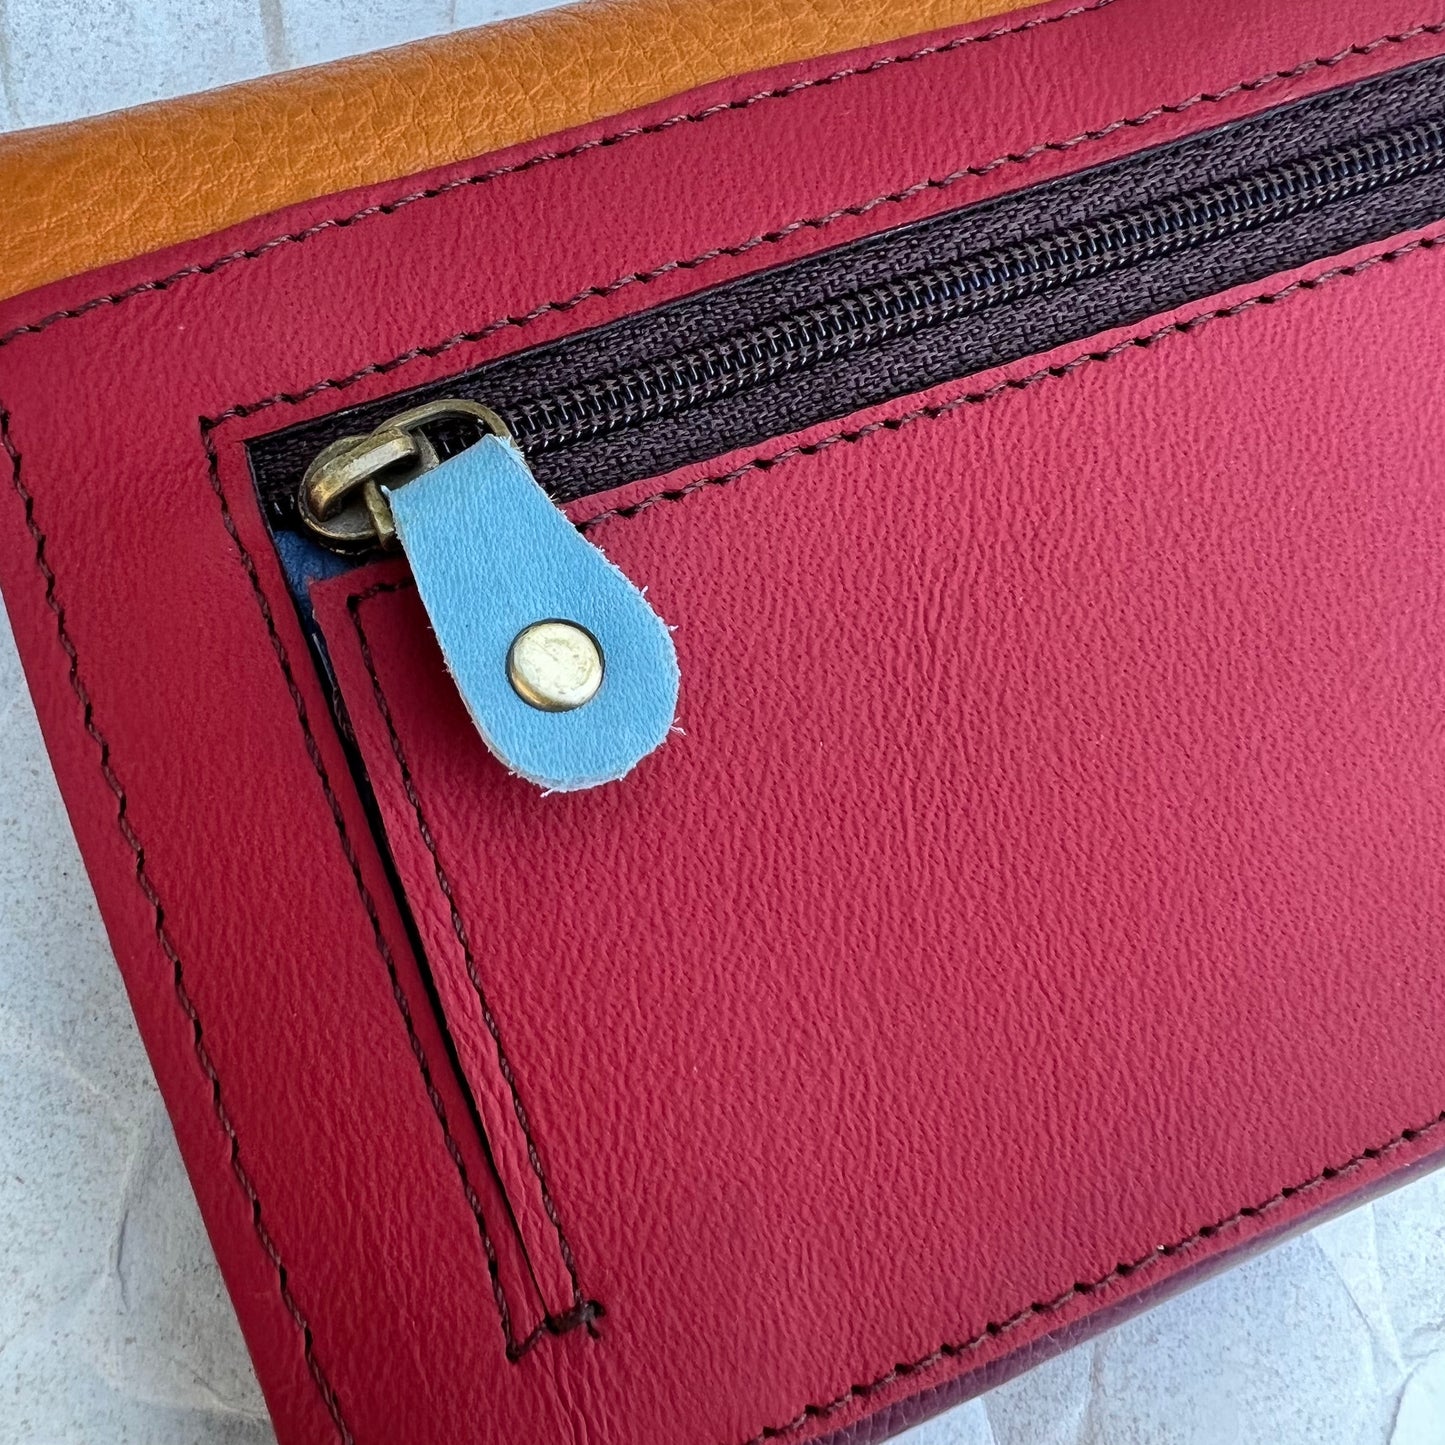 close up view of the zipper on the maroon and mango secret clutch